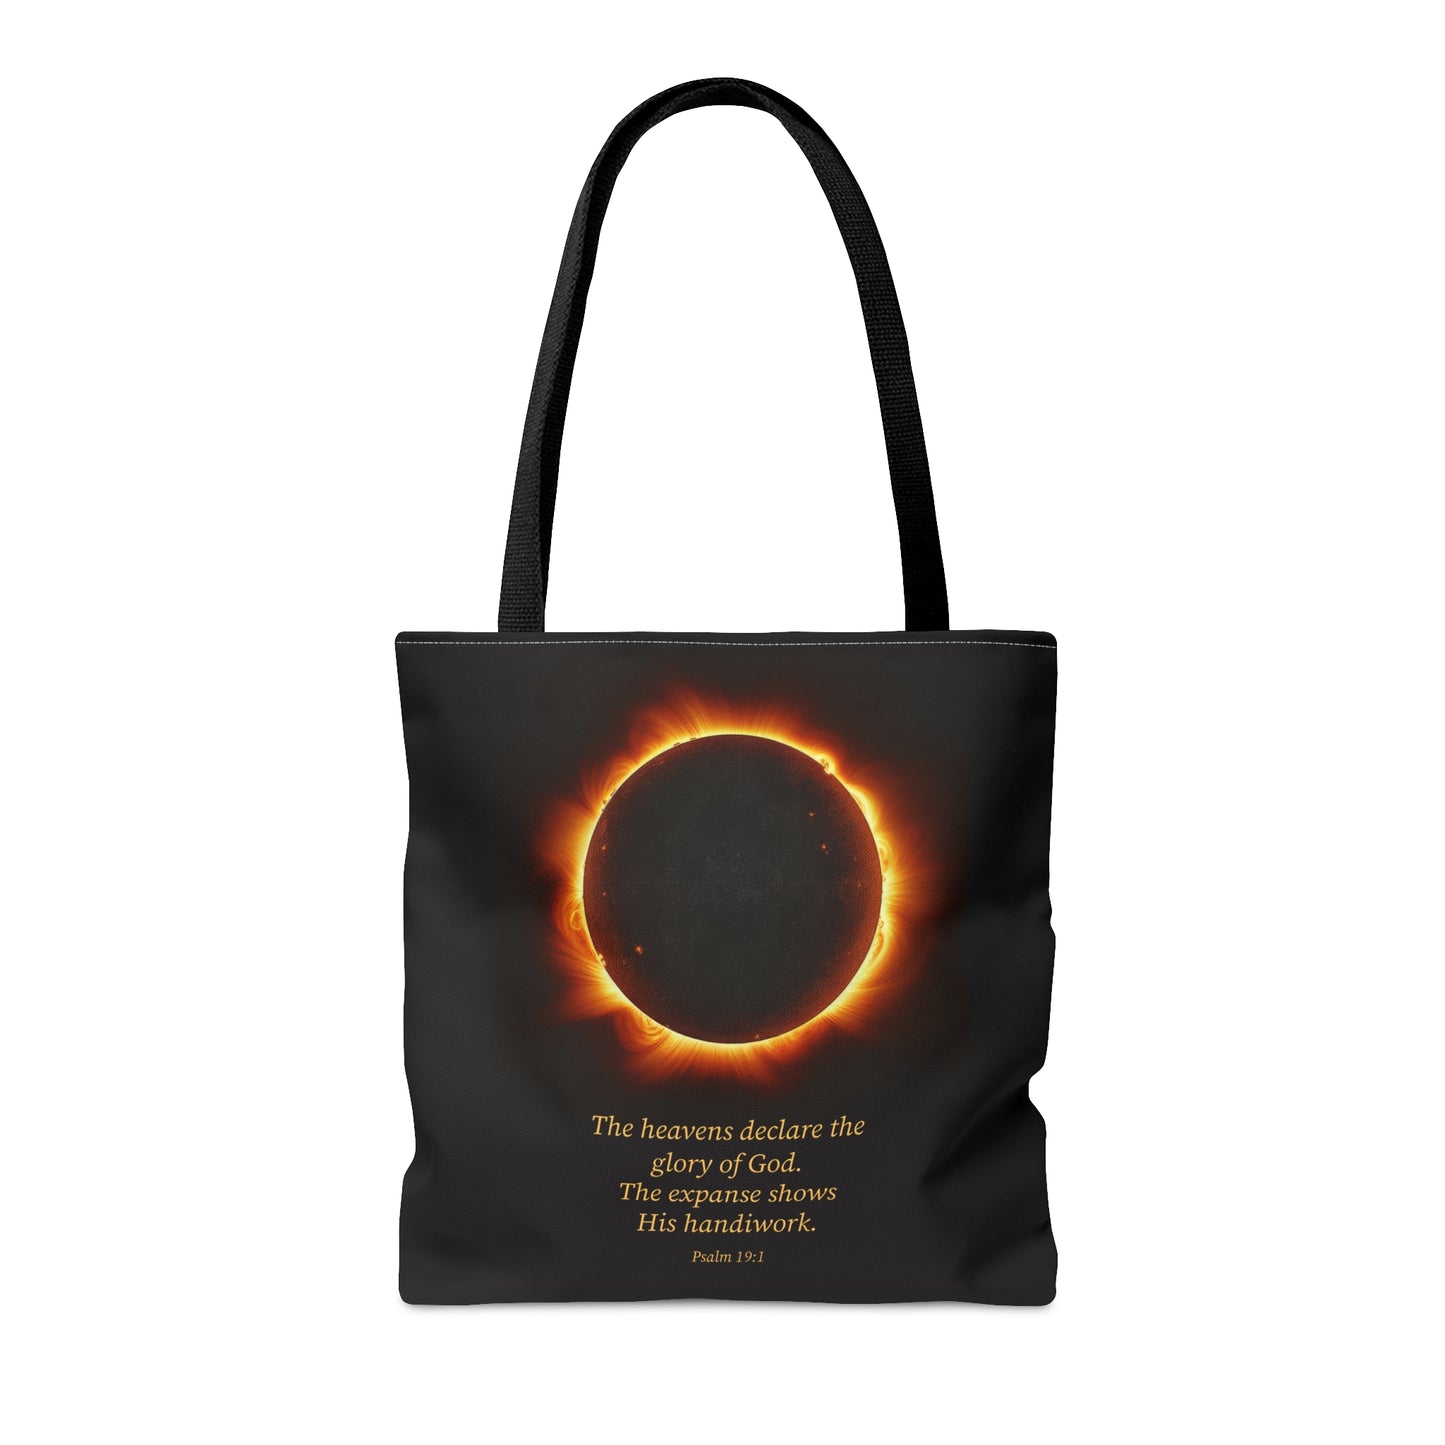 Tote Bag - The Heavens Declare the Glory of God